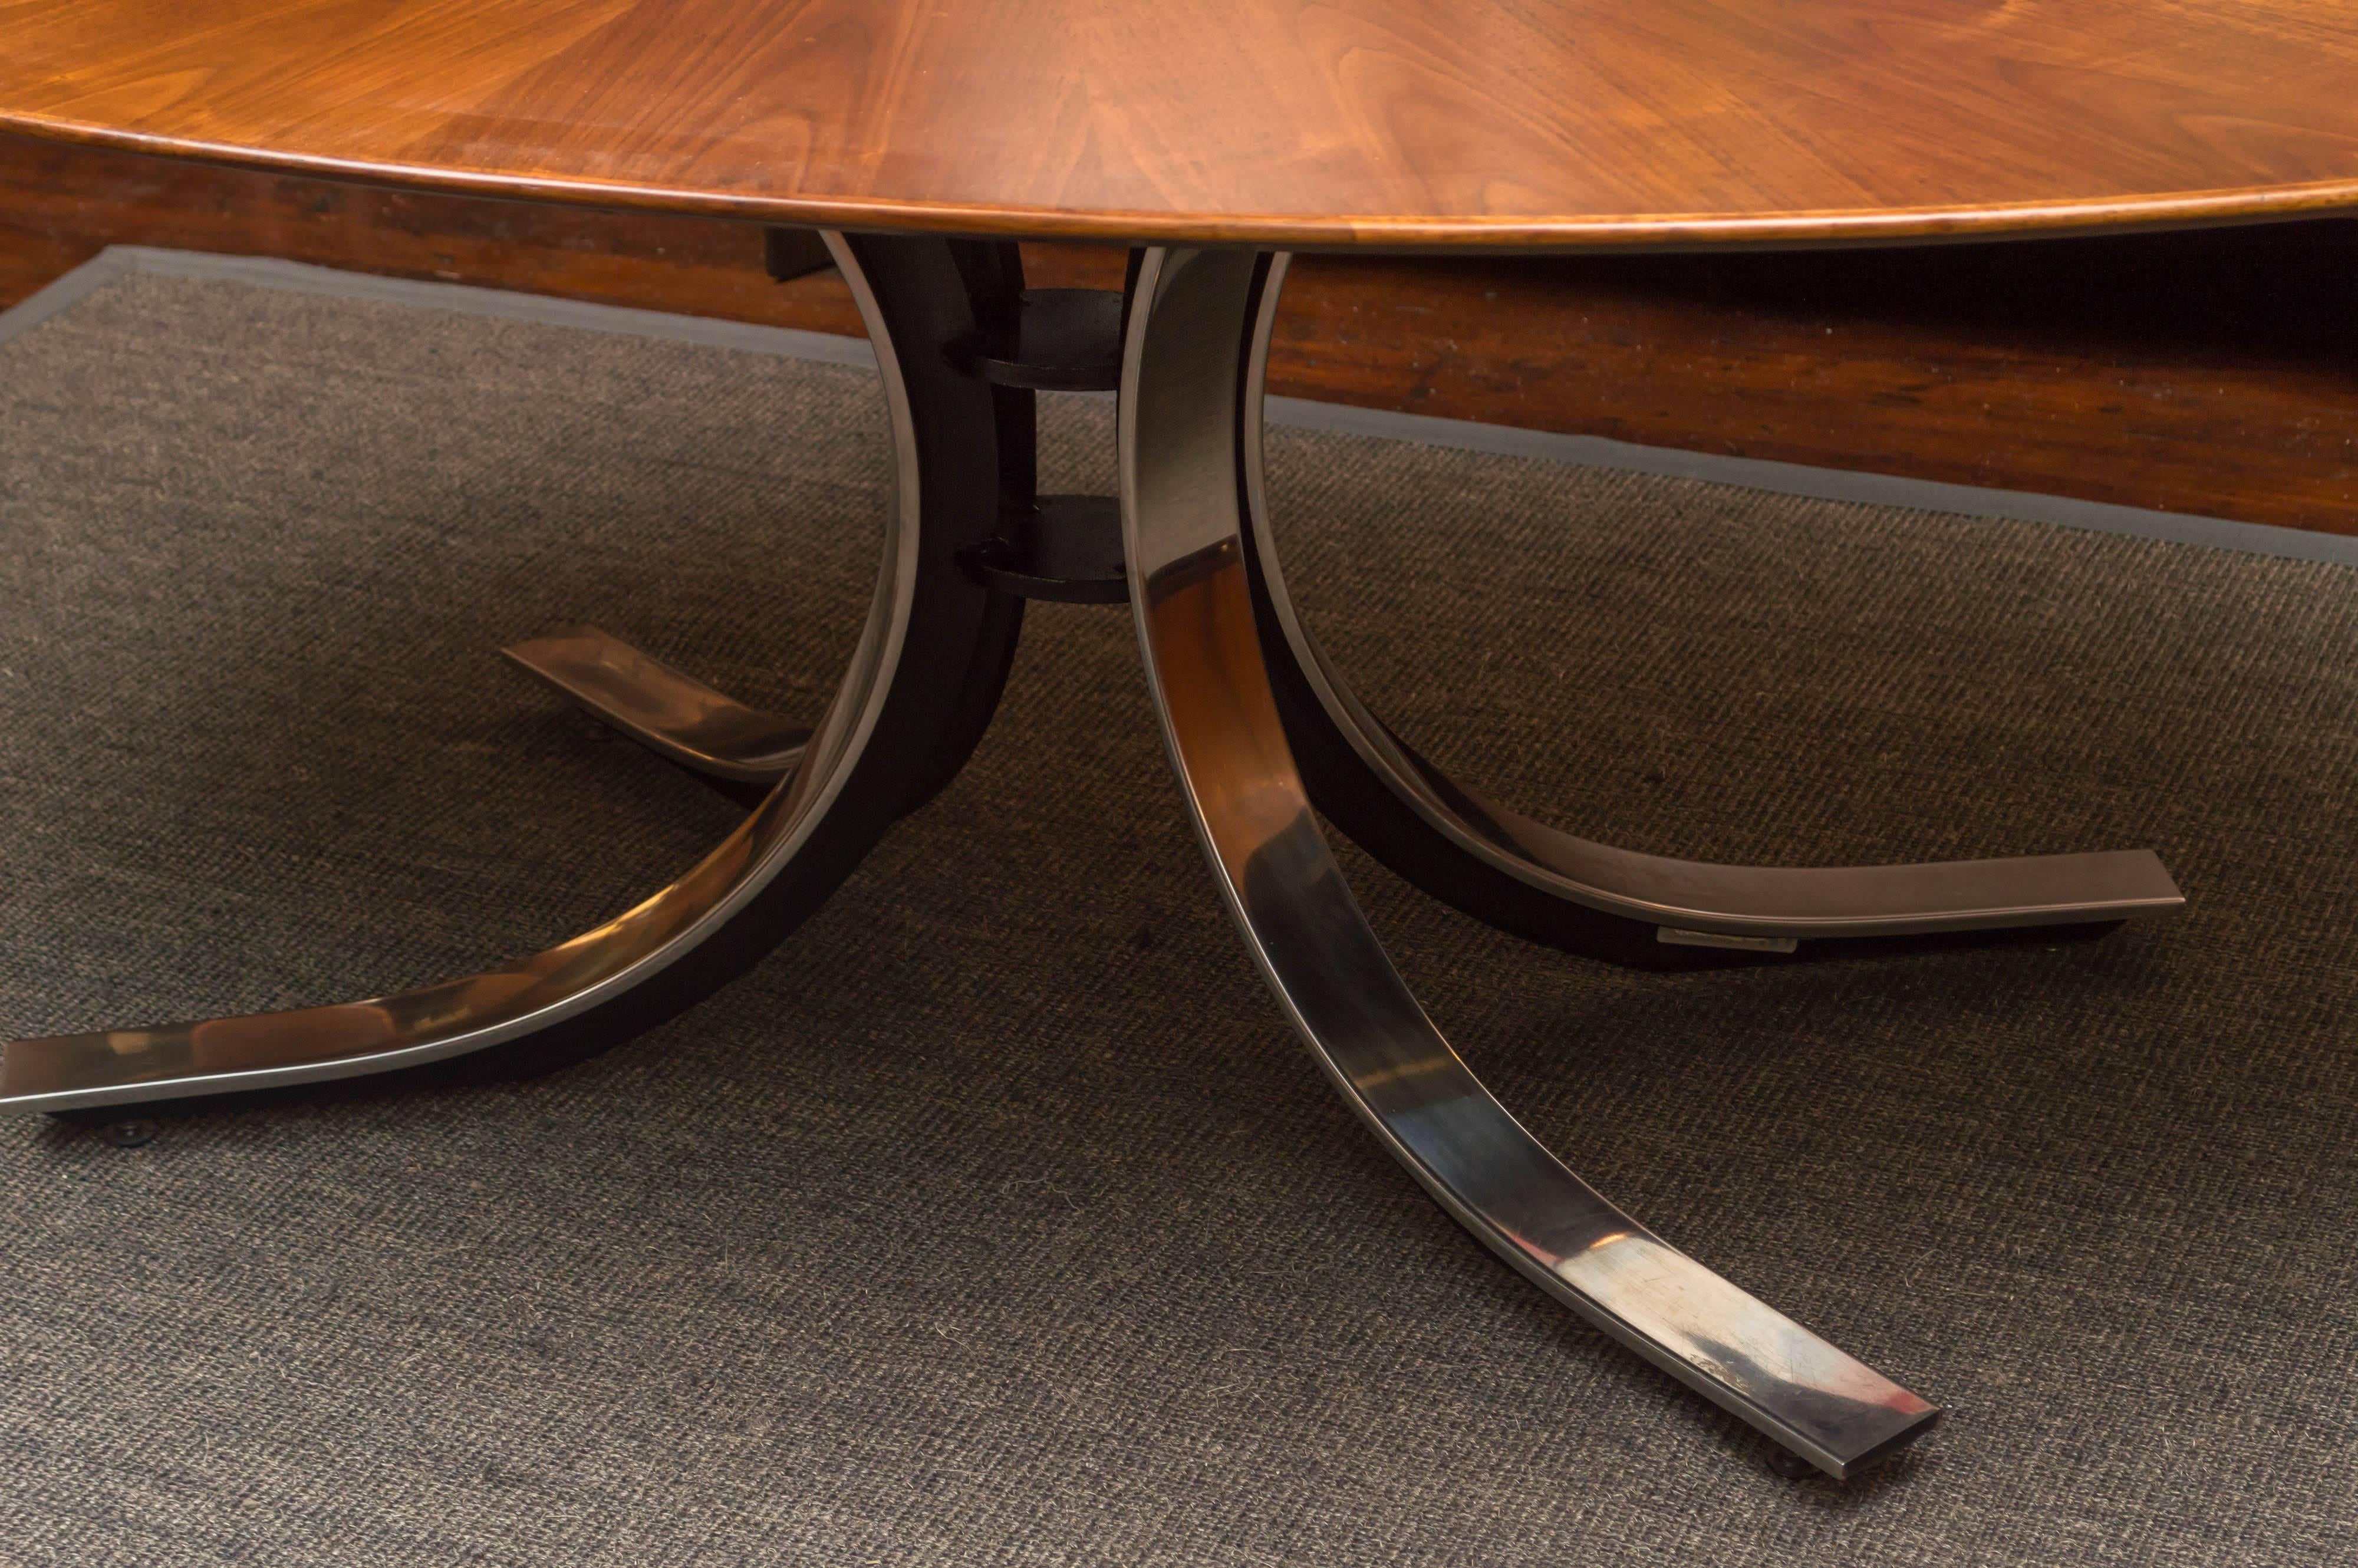 Beautiful design oval dining table on a chrome pedestal base in the style of Osvaldo Borsani. Top is a starburst walnut veneer pattern, perfectly refinished.